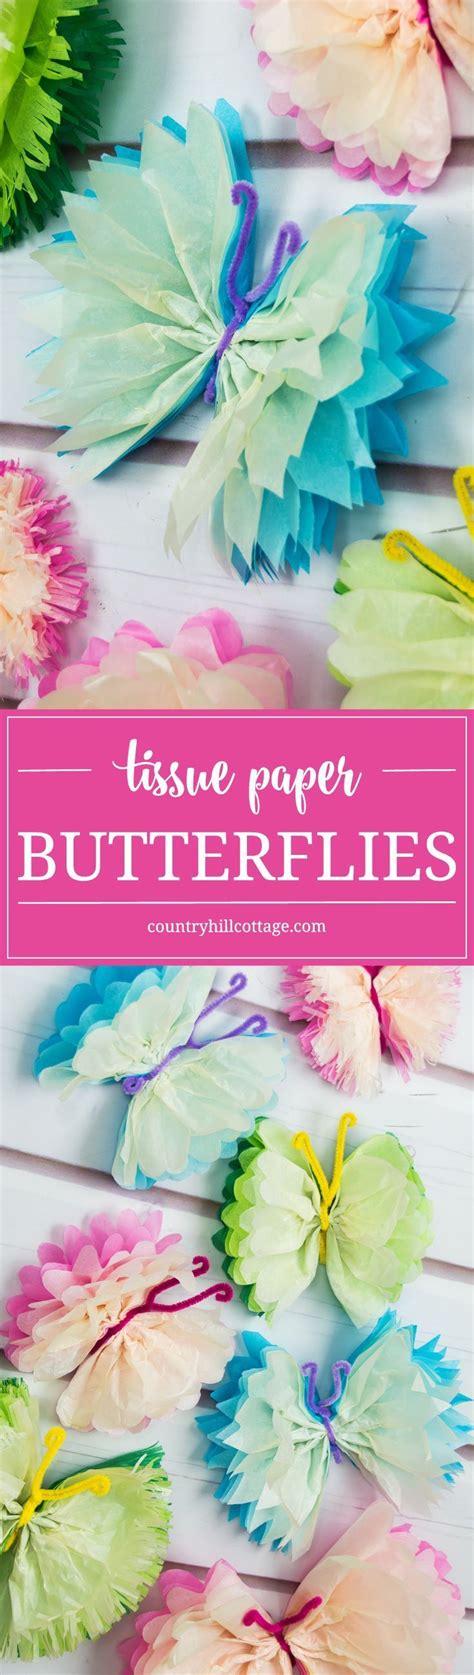 Frilly Tissue Paper Butterflies Are A Beautiful Decoration For Parties